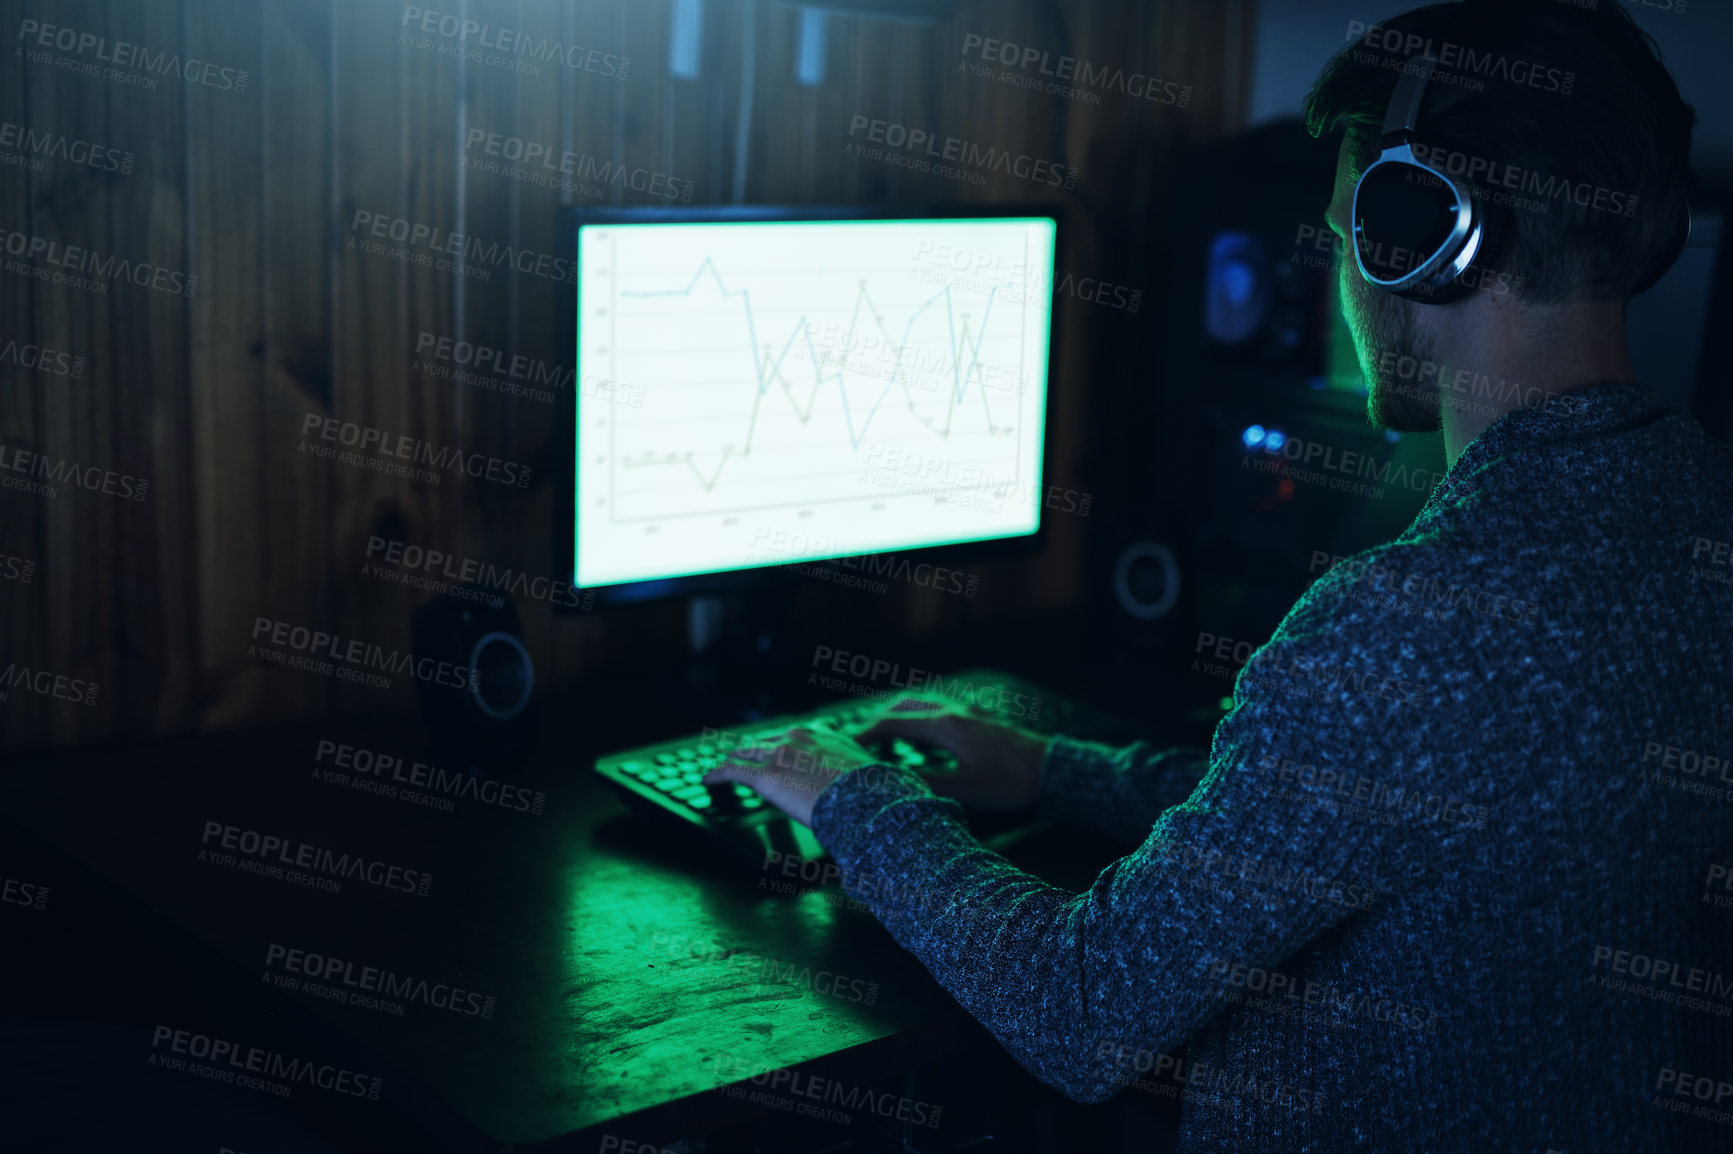 Buy stock photo Shot of a young man using a computer and hacking in a dark room at home